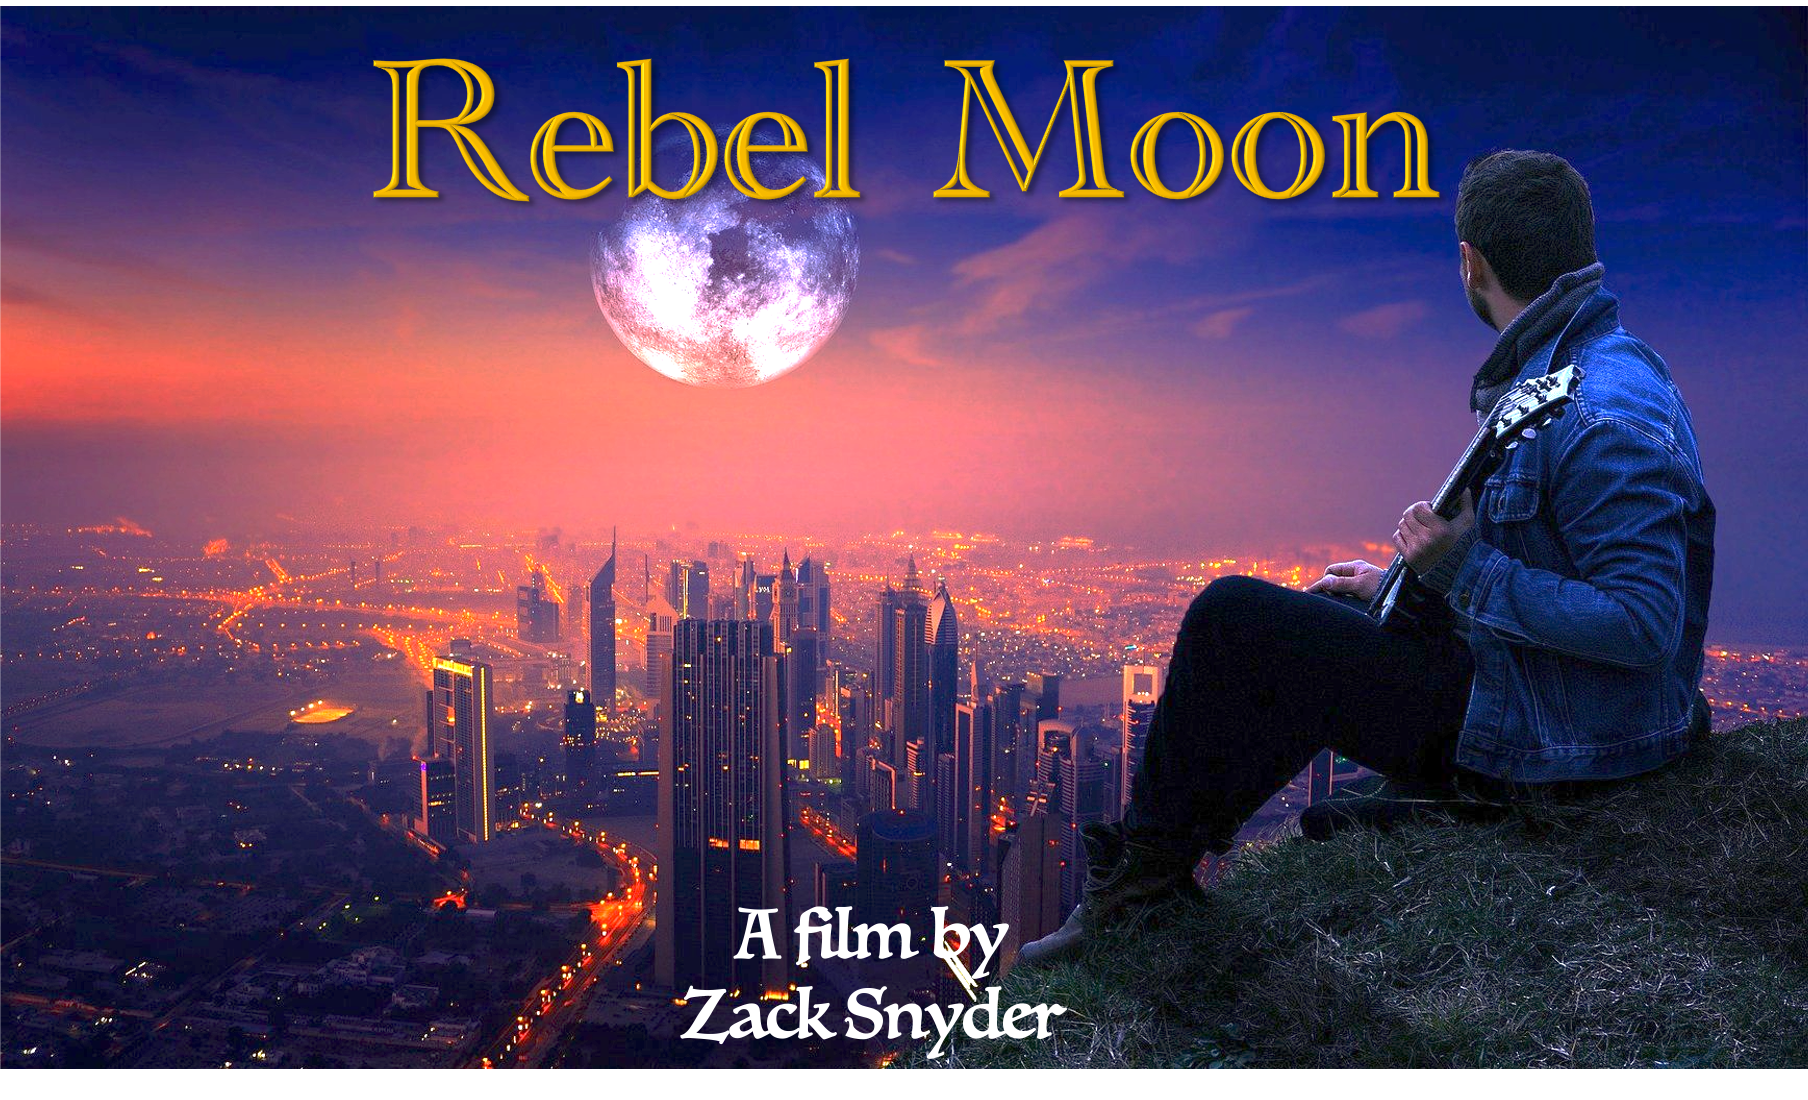 New Poster for Zack Snyder's REBEL MOON and the Teaser Trailer